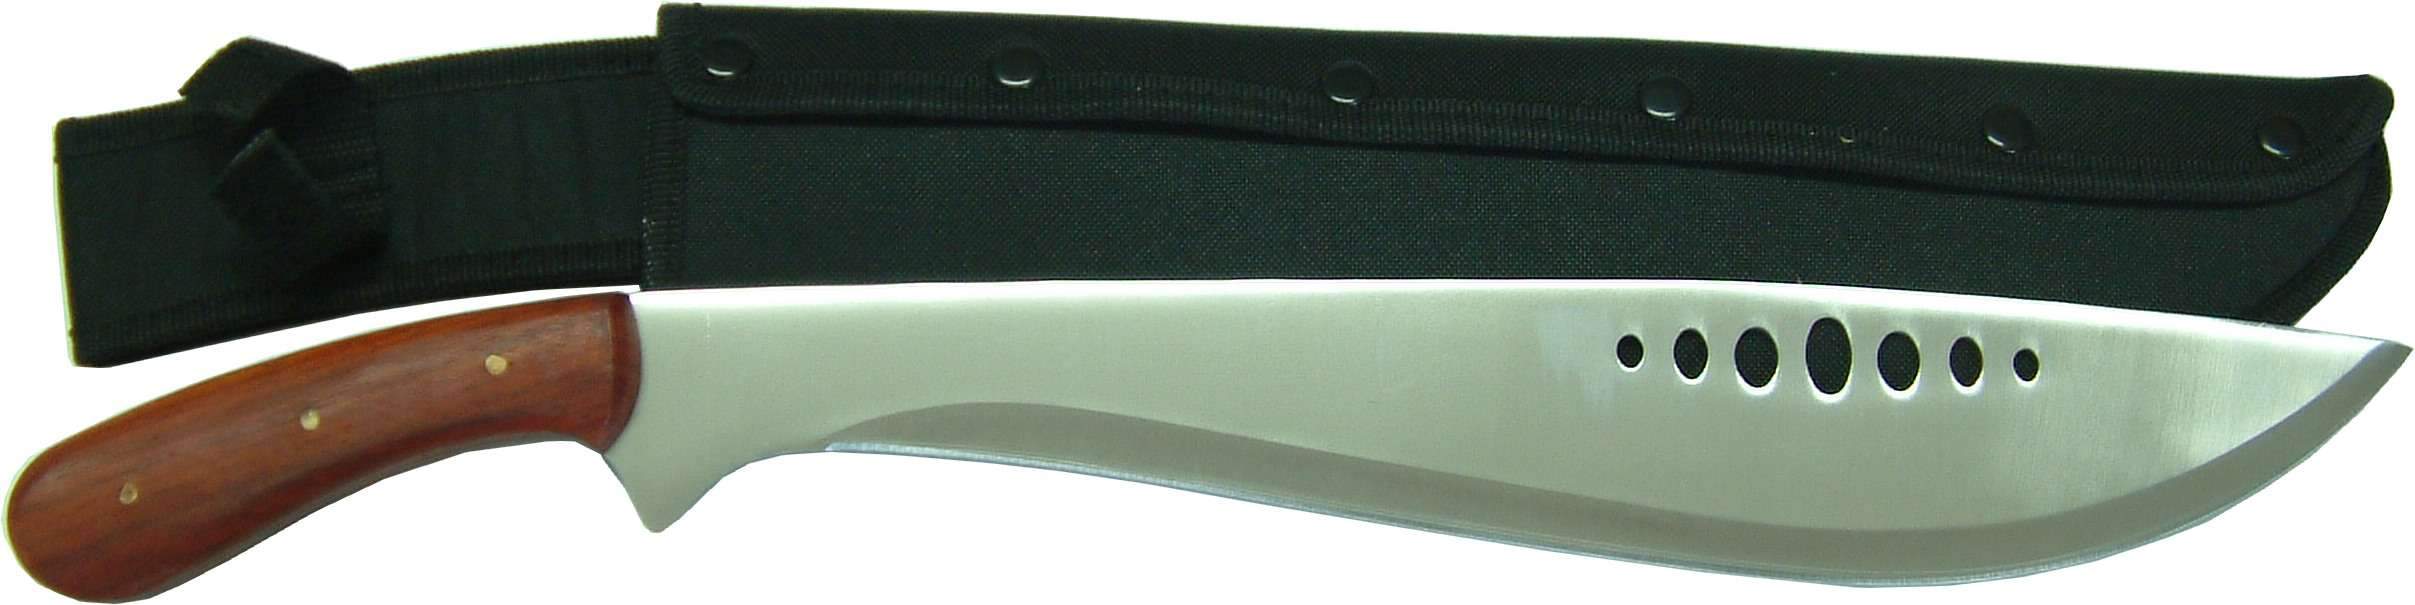 Machette with Stainless Blade & Wood Handle in Nylon Sheath 400mm